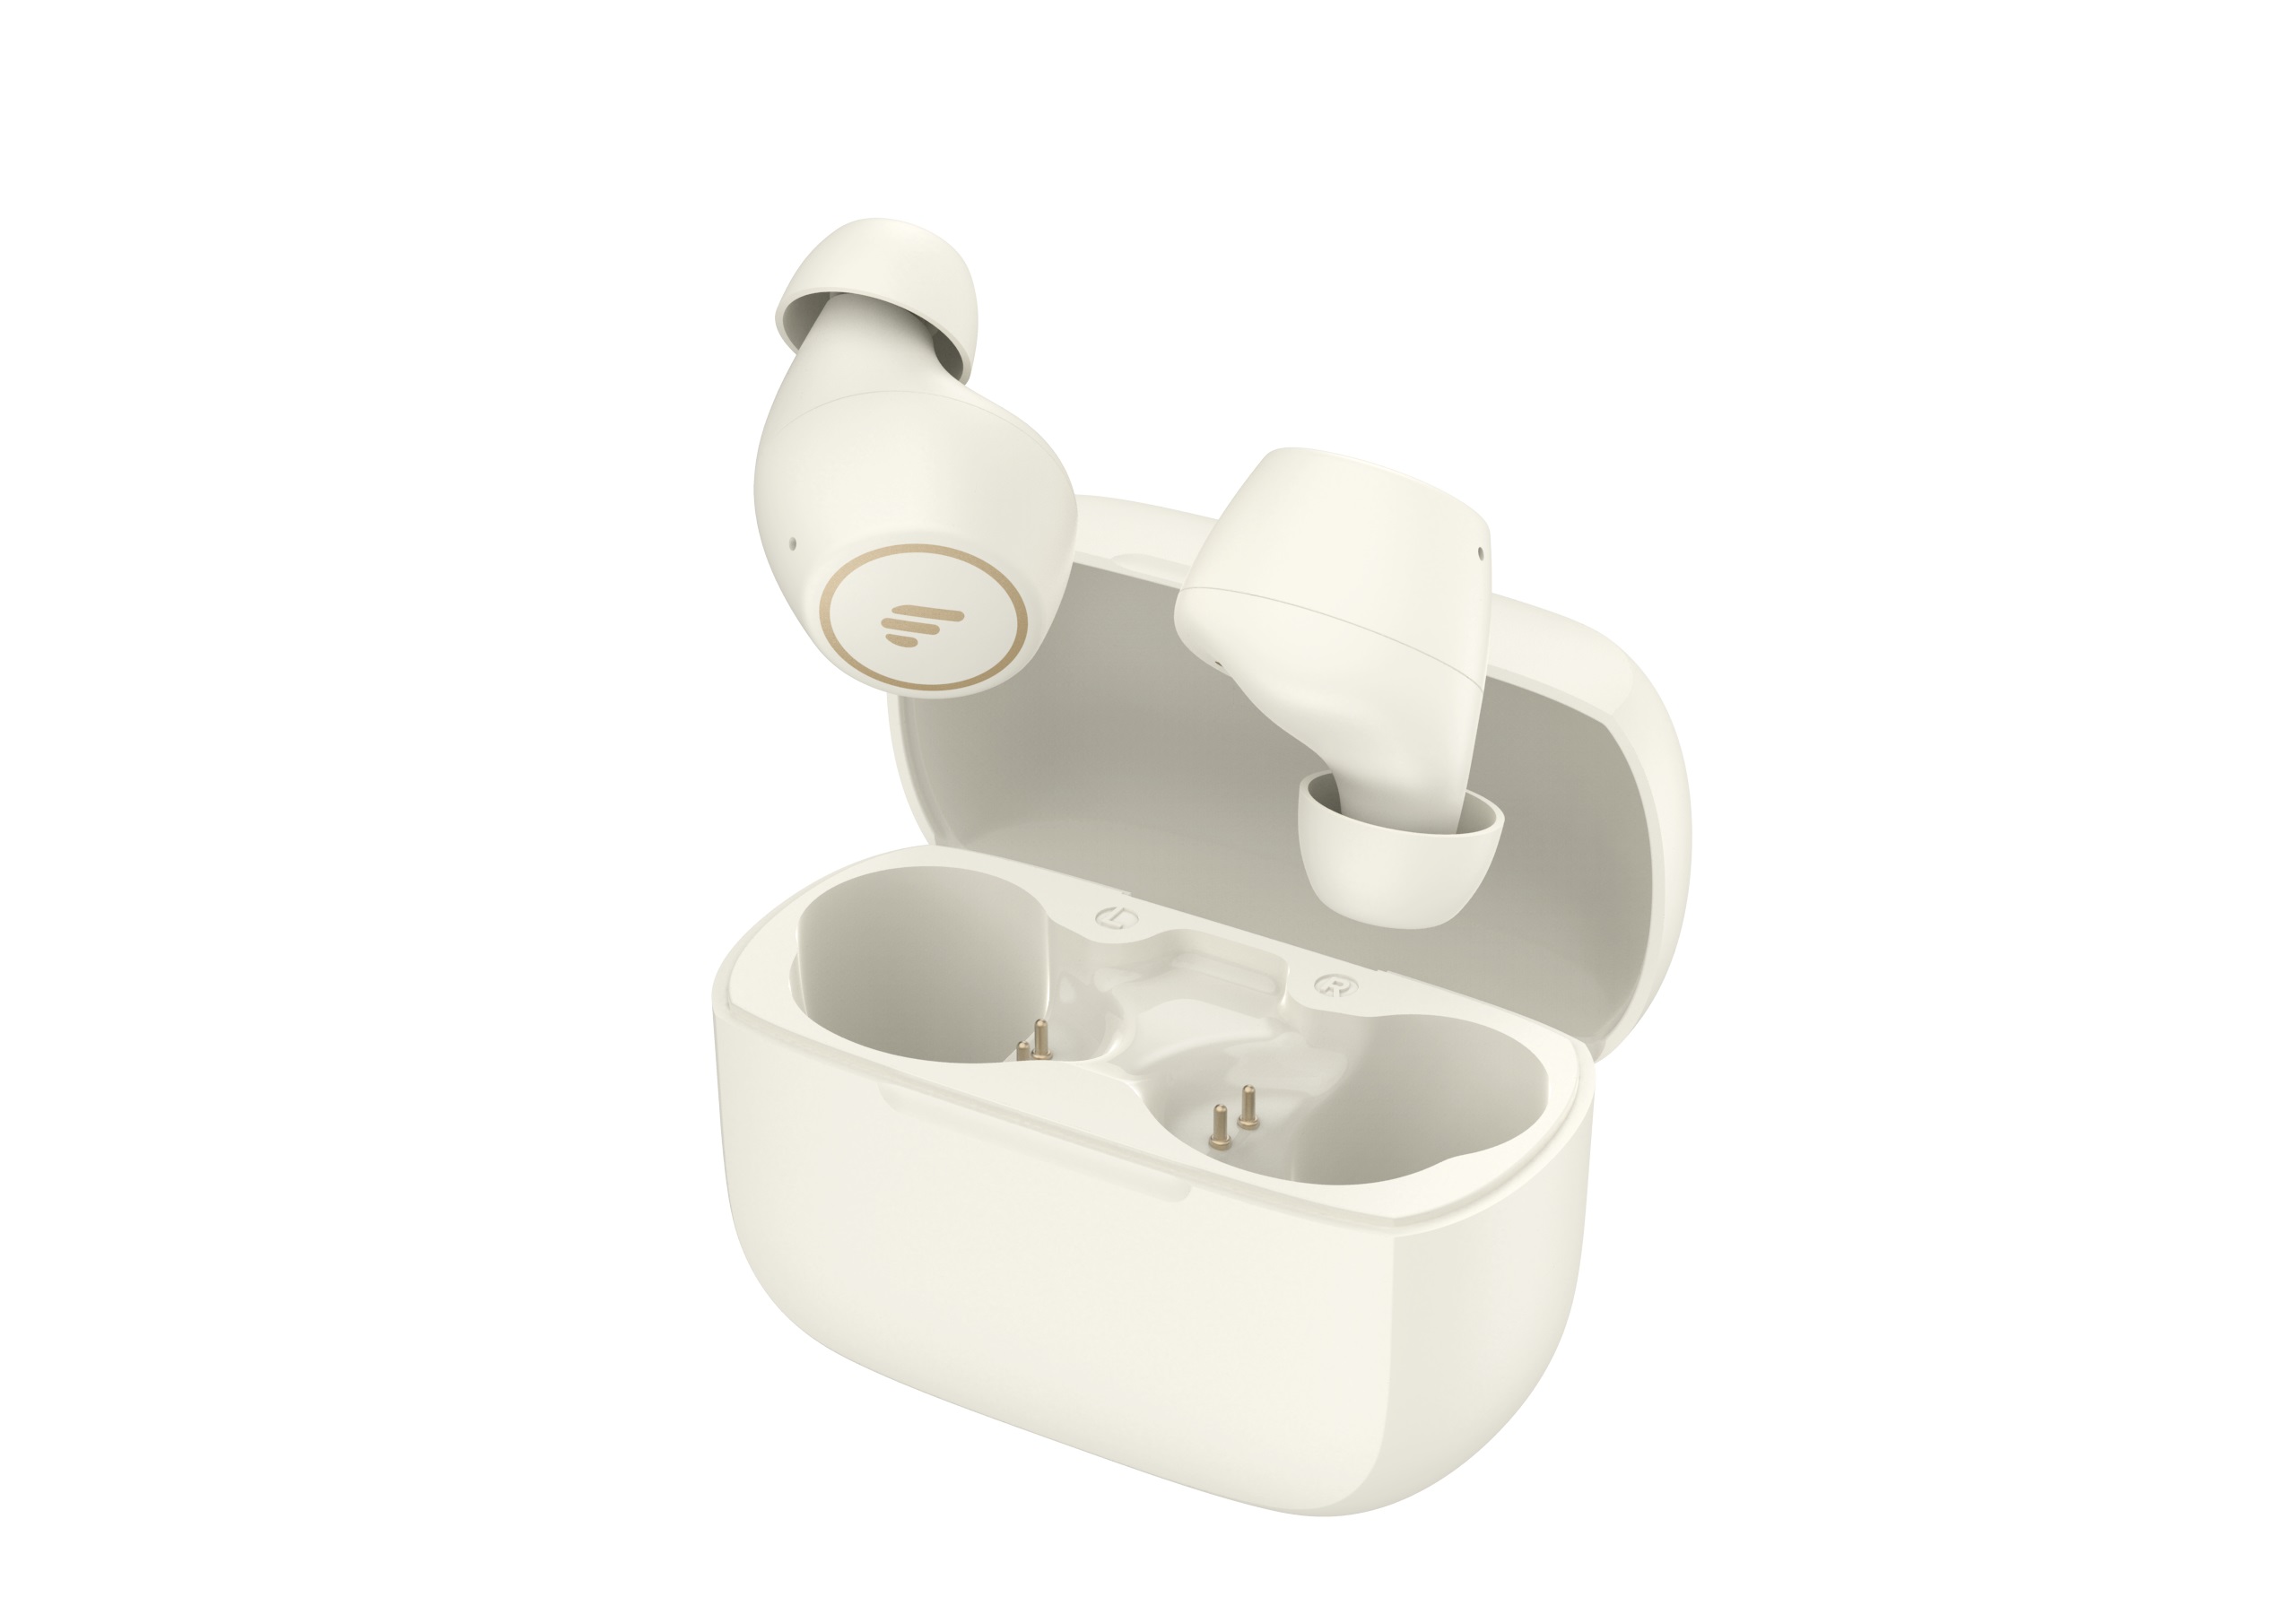 Edifier TWS1 PRO IVORY Bluetooth Wireless Earbuds cVc8.0 Noise Cancellation Long Battery Life, Quick Charge USB-C, IP65 Dust Proof and Water Resistant